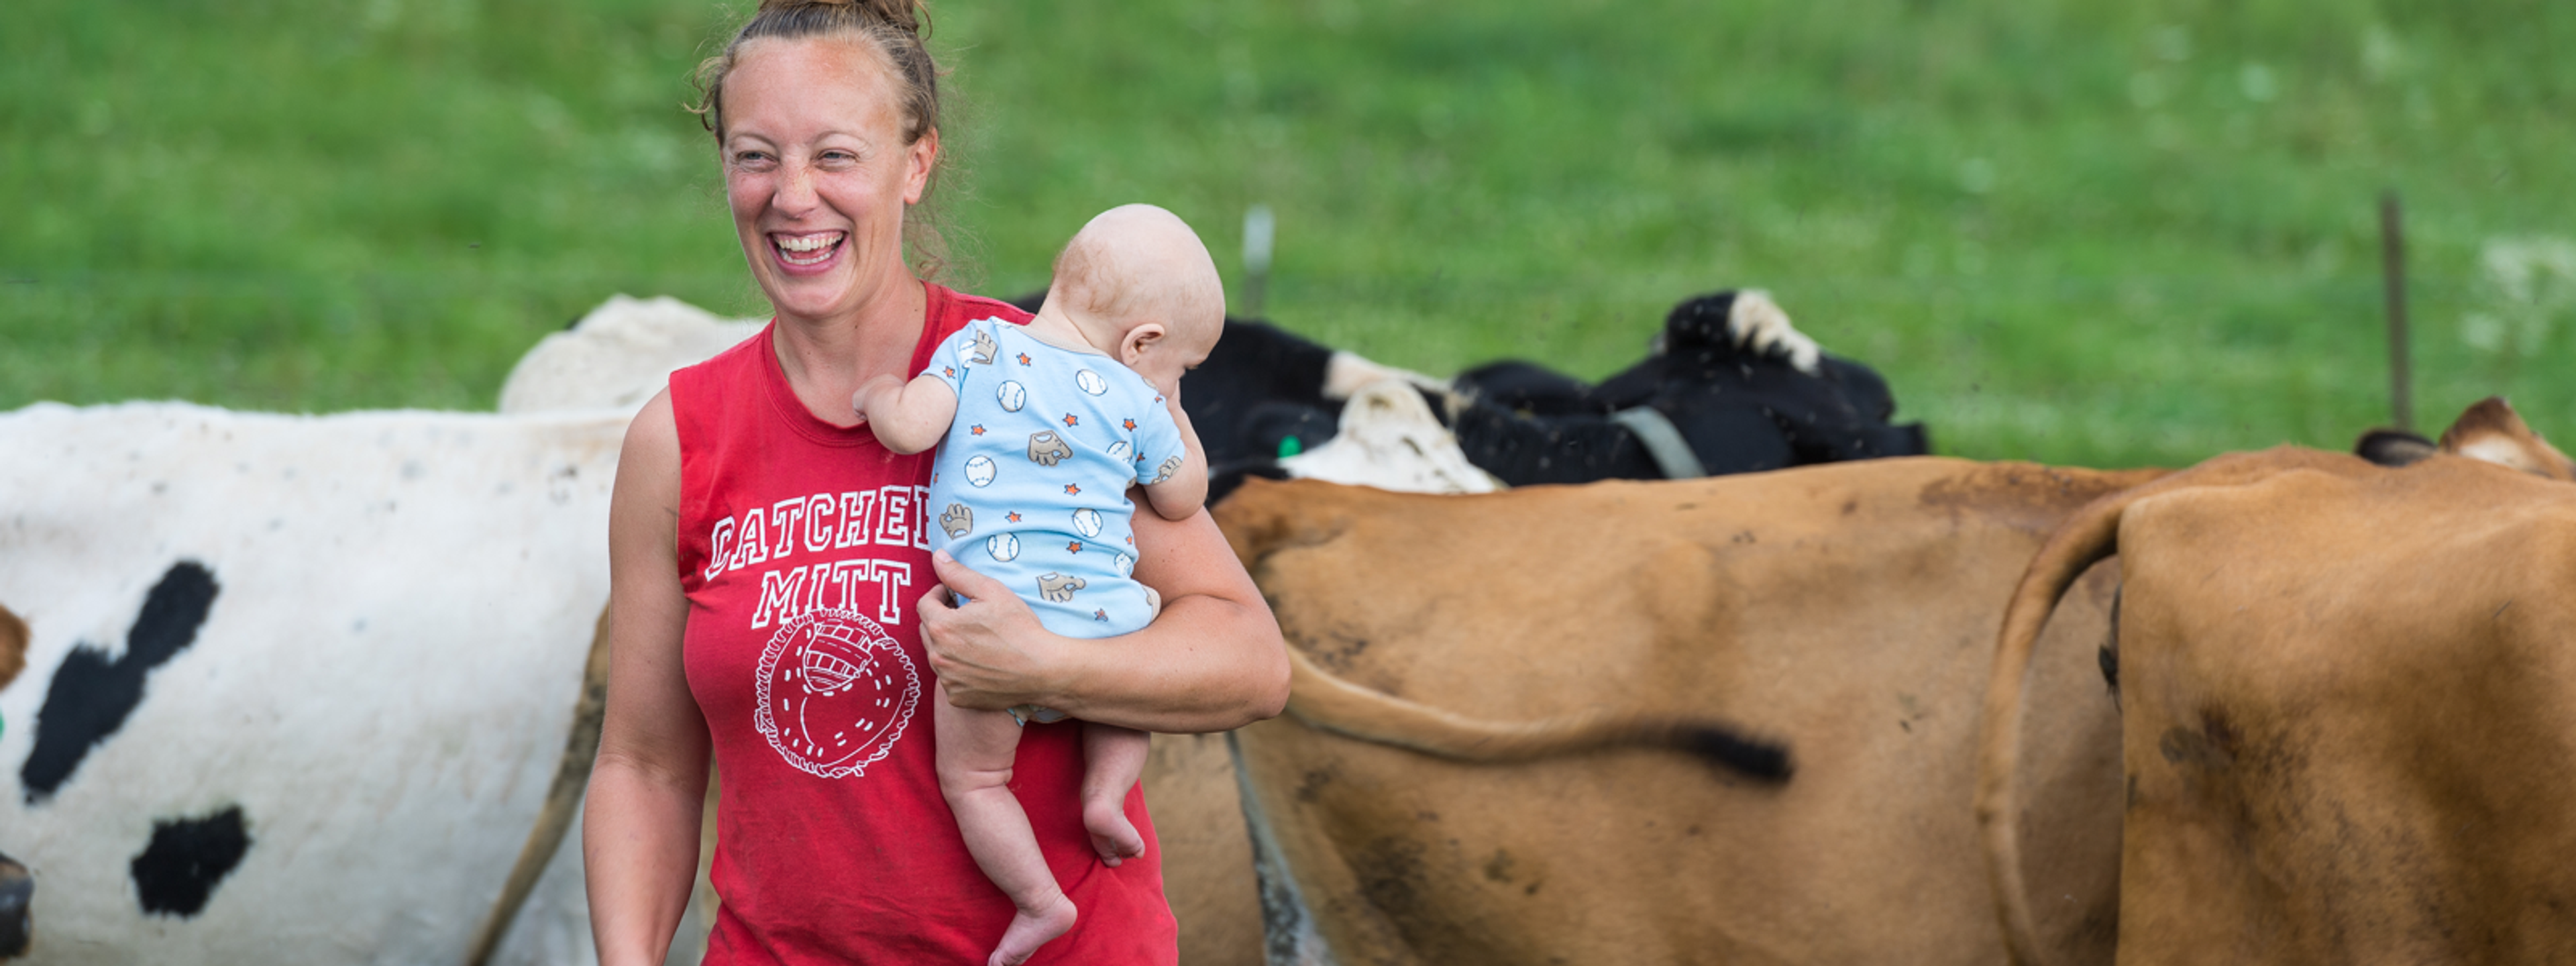 Amy Koenig has a big smile while carrying her baby through a pasture with cows behind her.